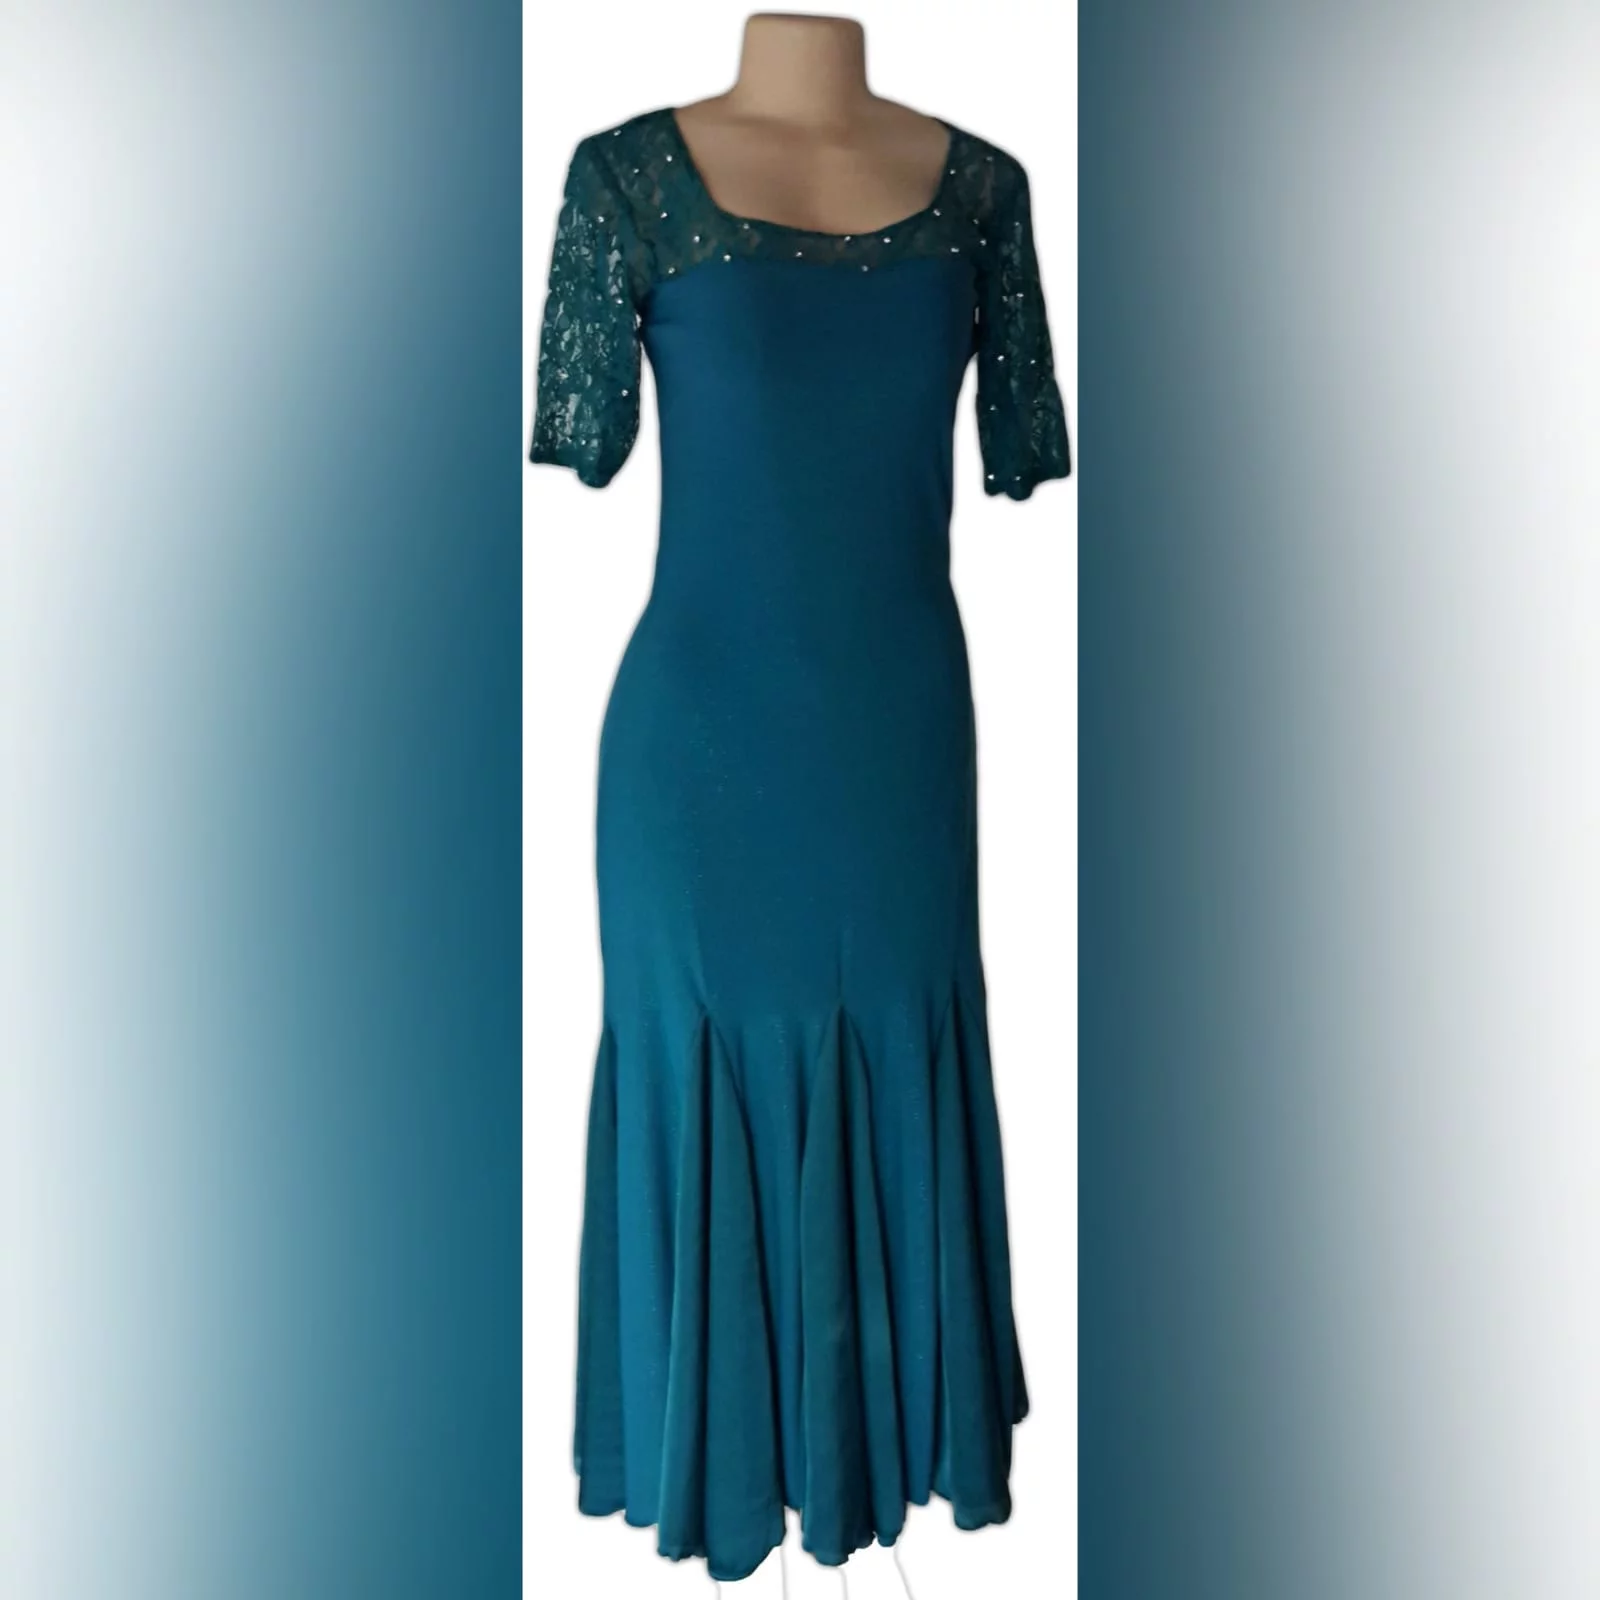 Turquoise green long party dress 4 turquoise green long party dress, fitted till hip then it flows, with a lace neckline scattered with a few beads